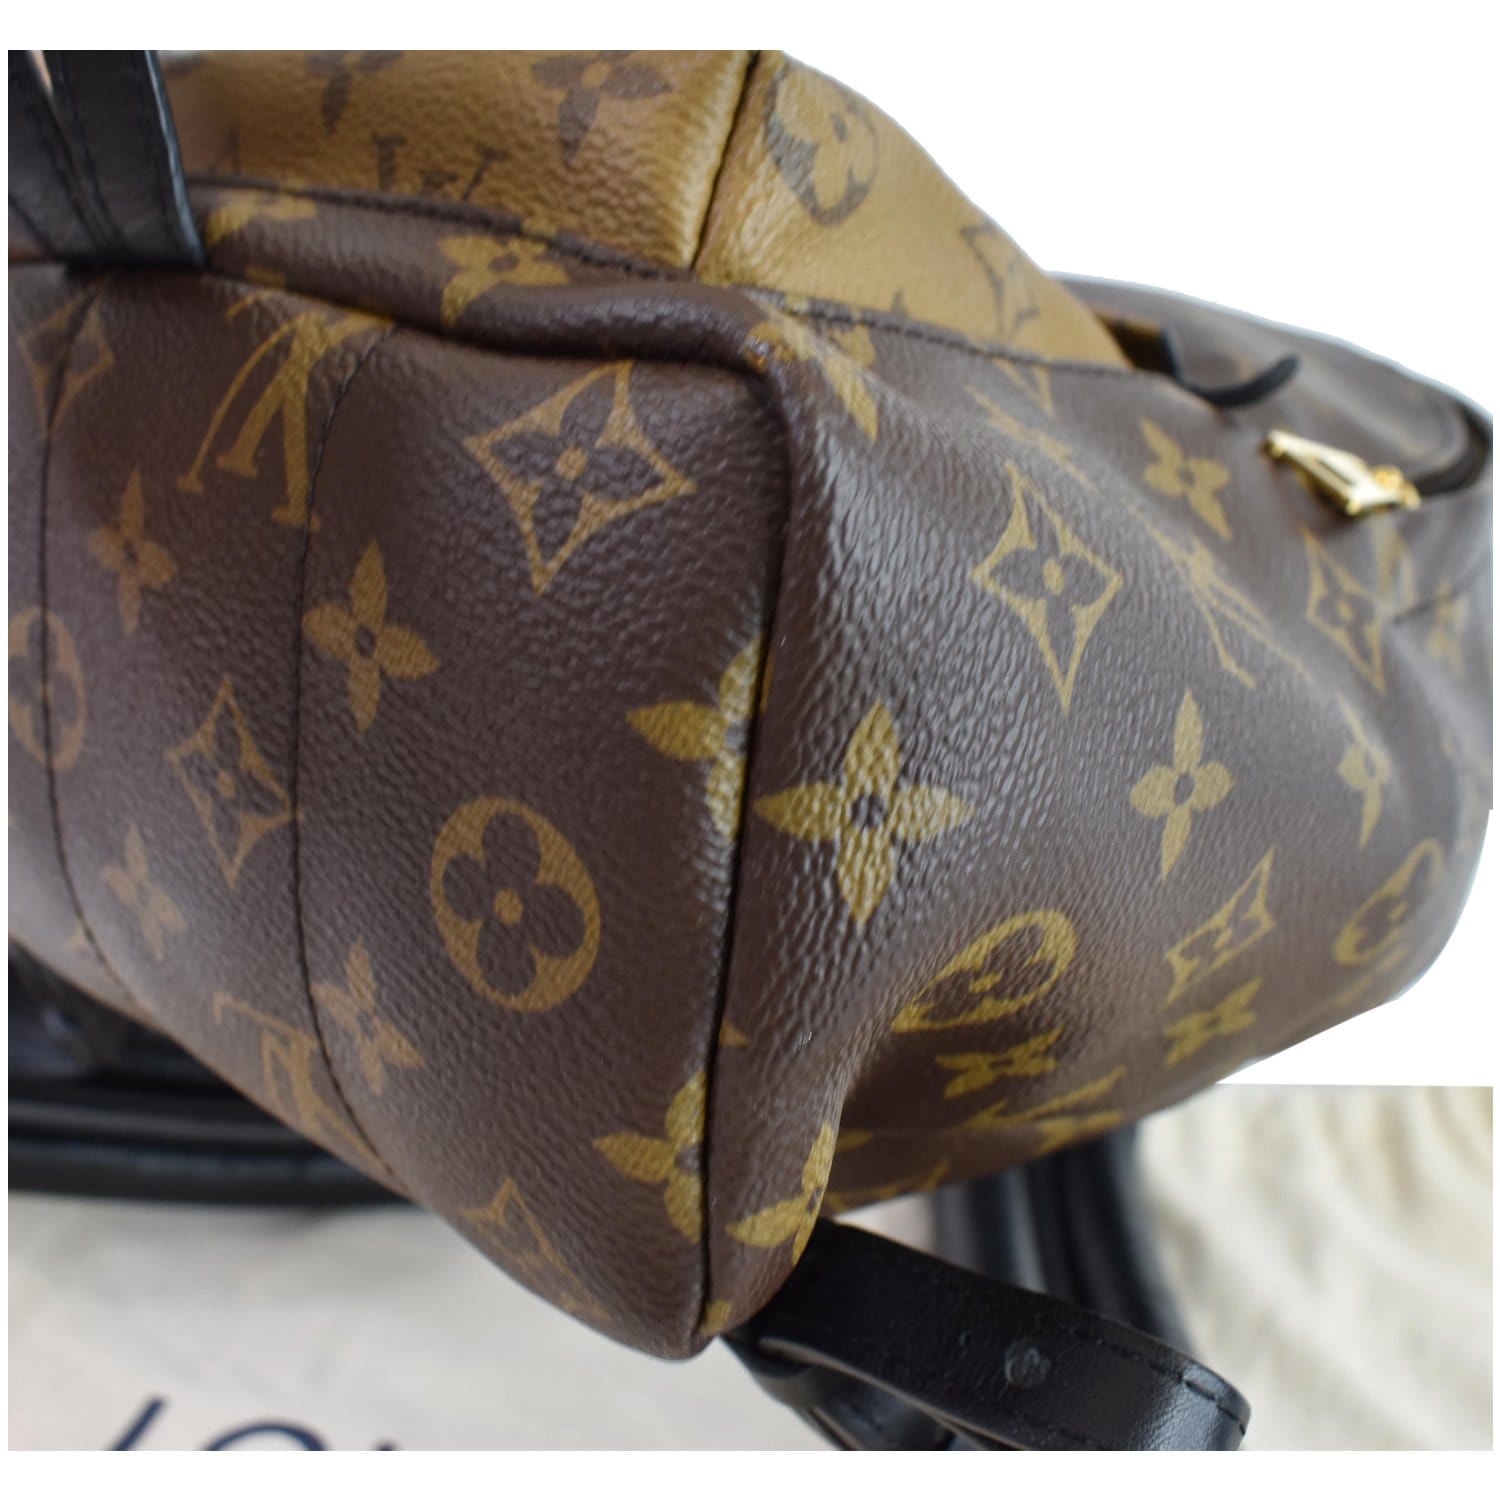 Louis Vuitton pre-owned Palm Springs Backpack PM Bag - Farfetch